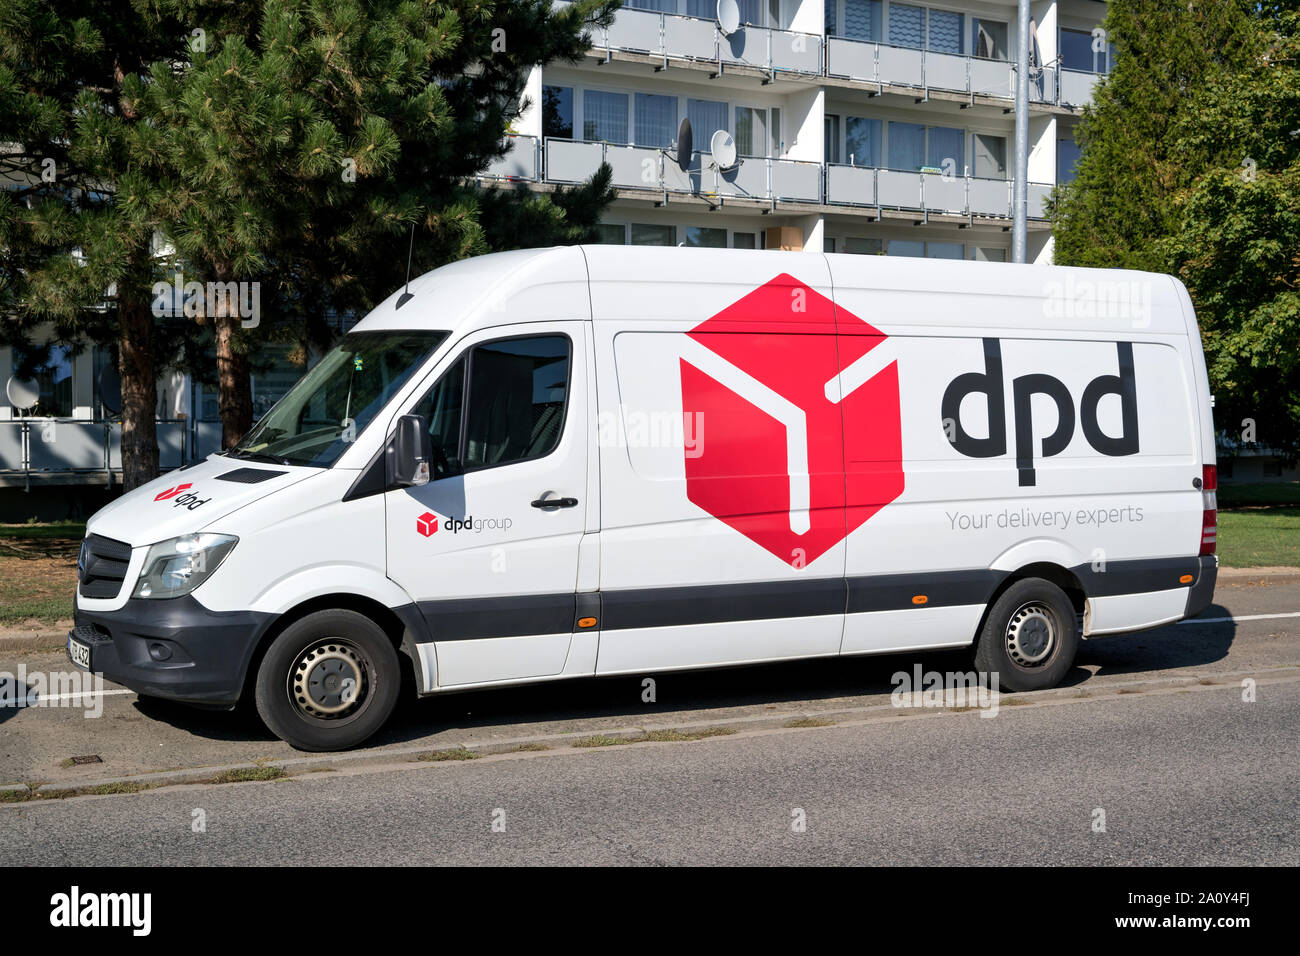 DPD delivery van. DPDgroup is the international parcel delivery network of French state owned postal service, La Poste. Stock Photo